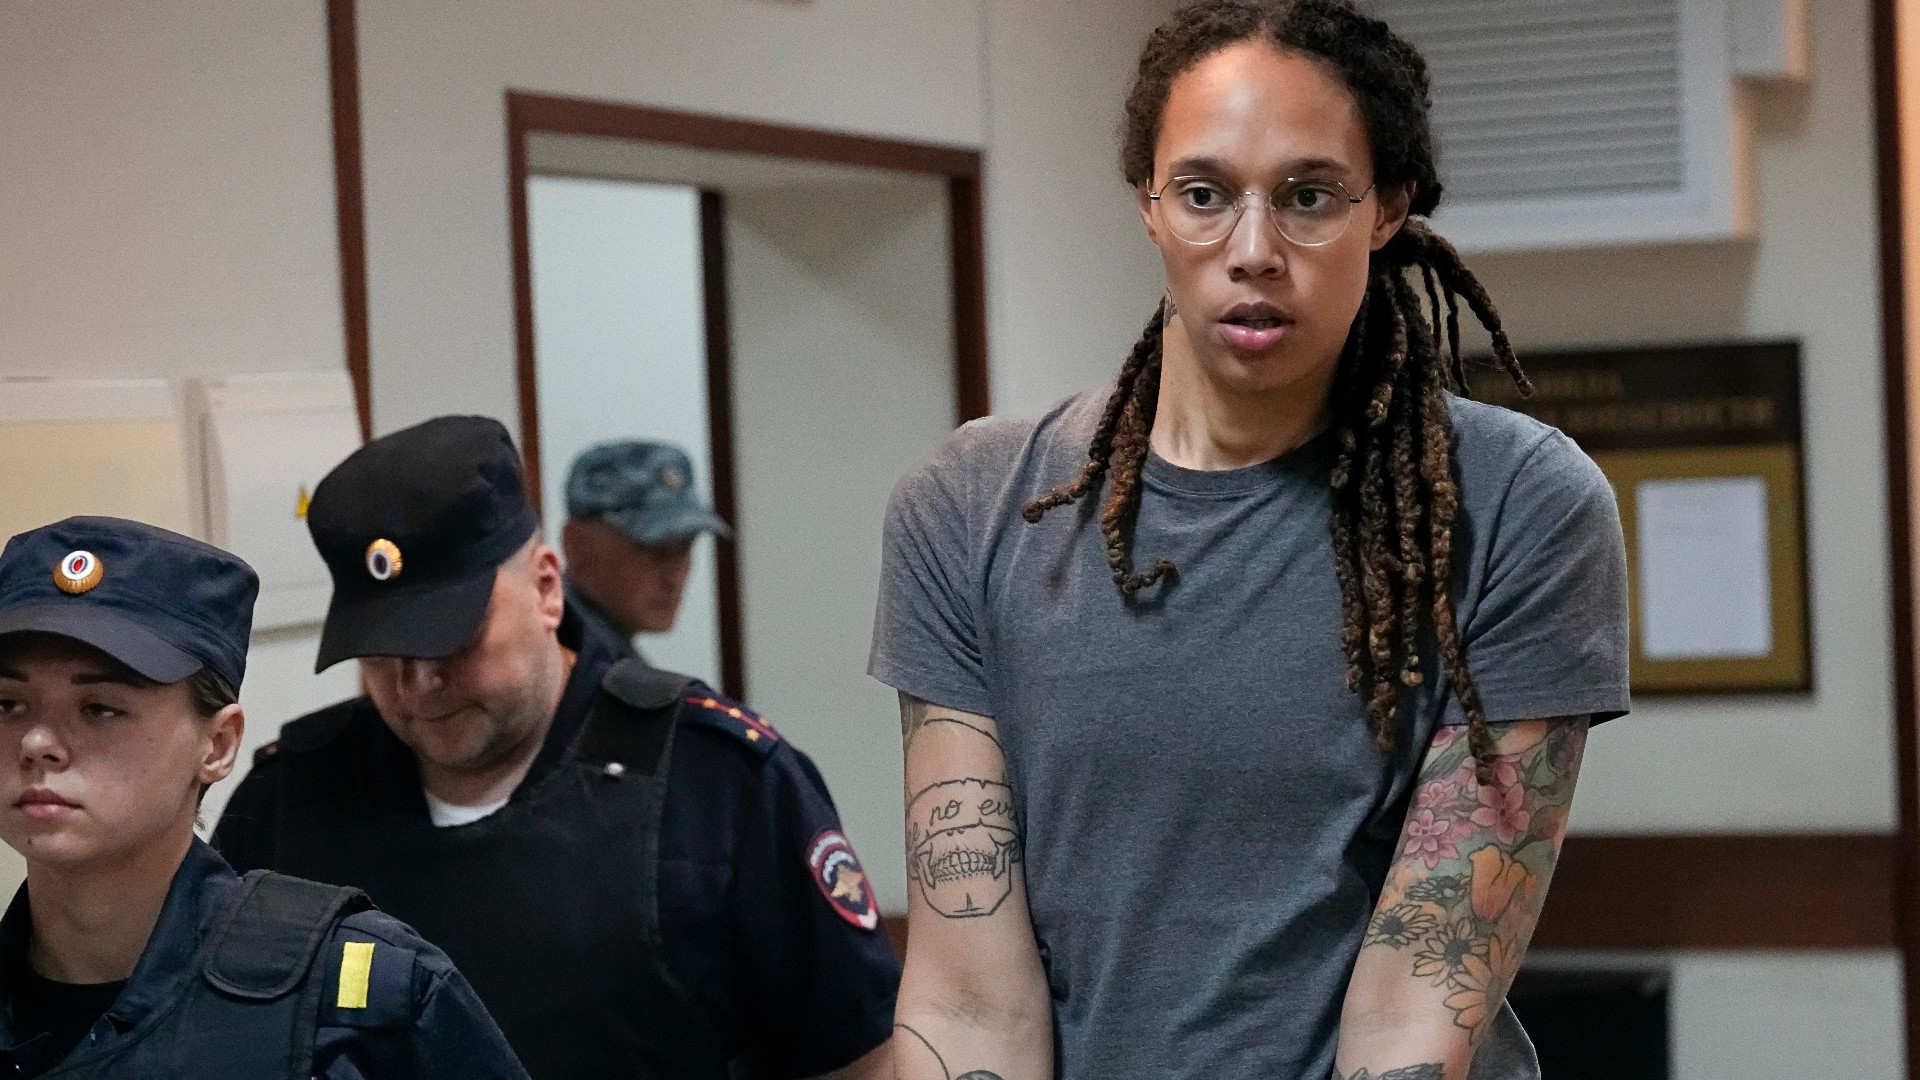 Russia freed WNBA star Brittney Griner on Thursday in a dramatic high-level prisoner exchange, with the U.S. releasing notorious Russian arms dealer Viktor Bout.